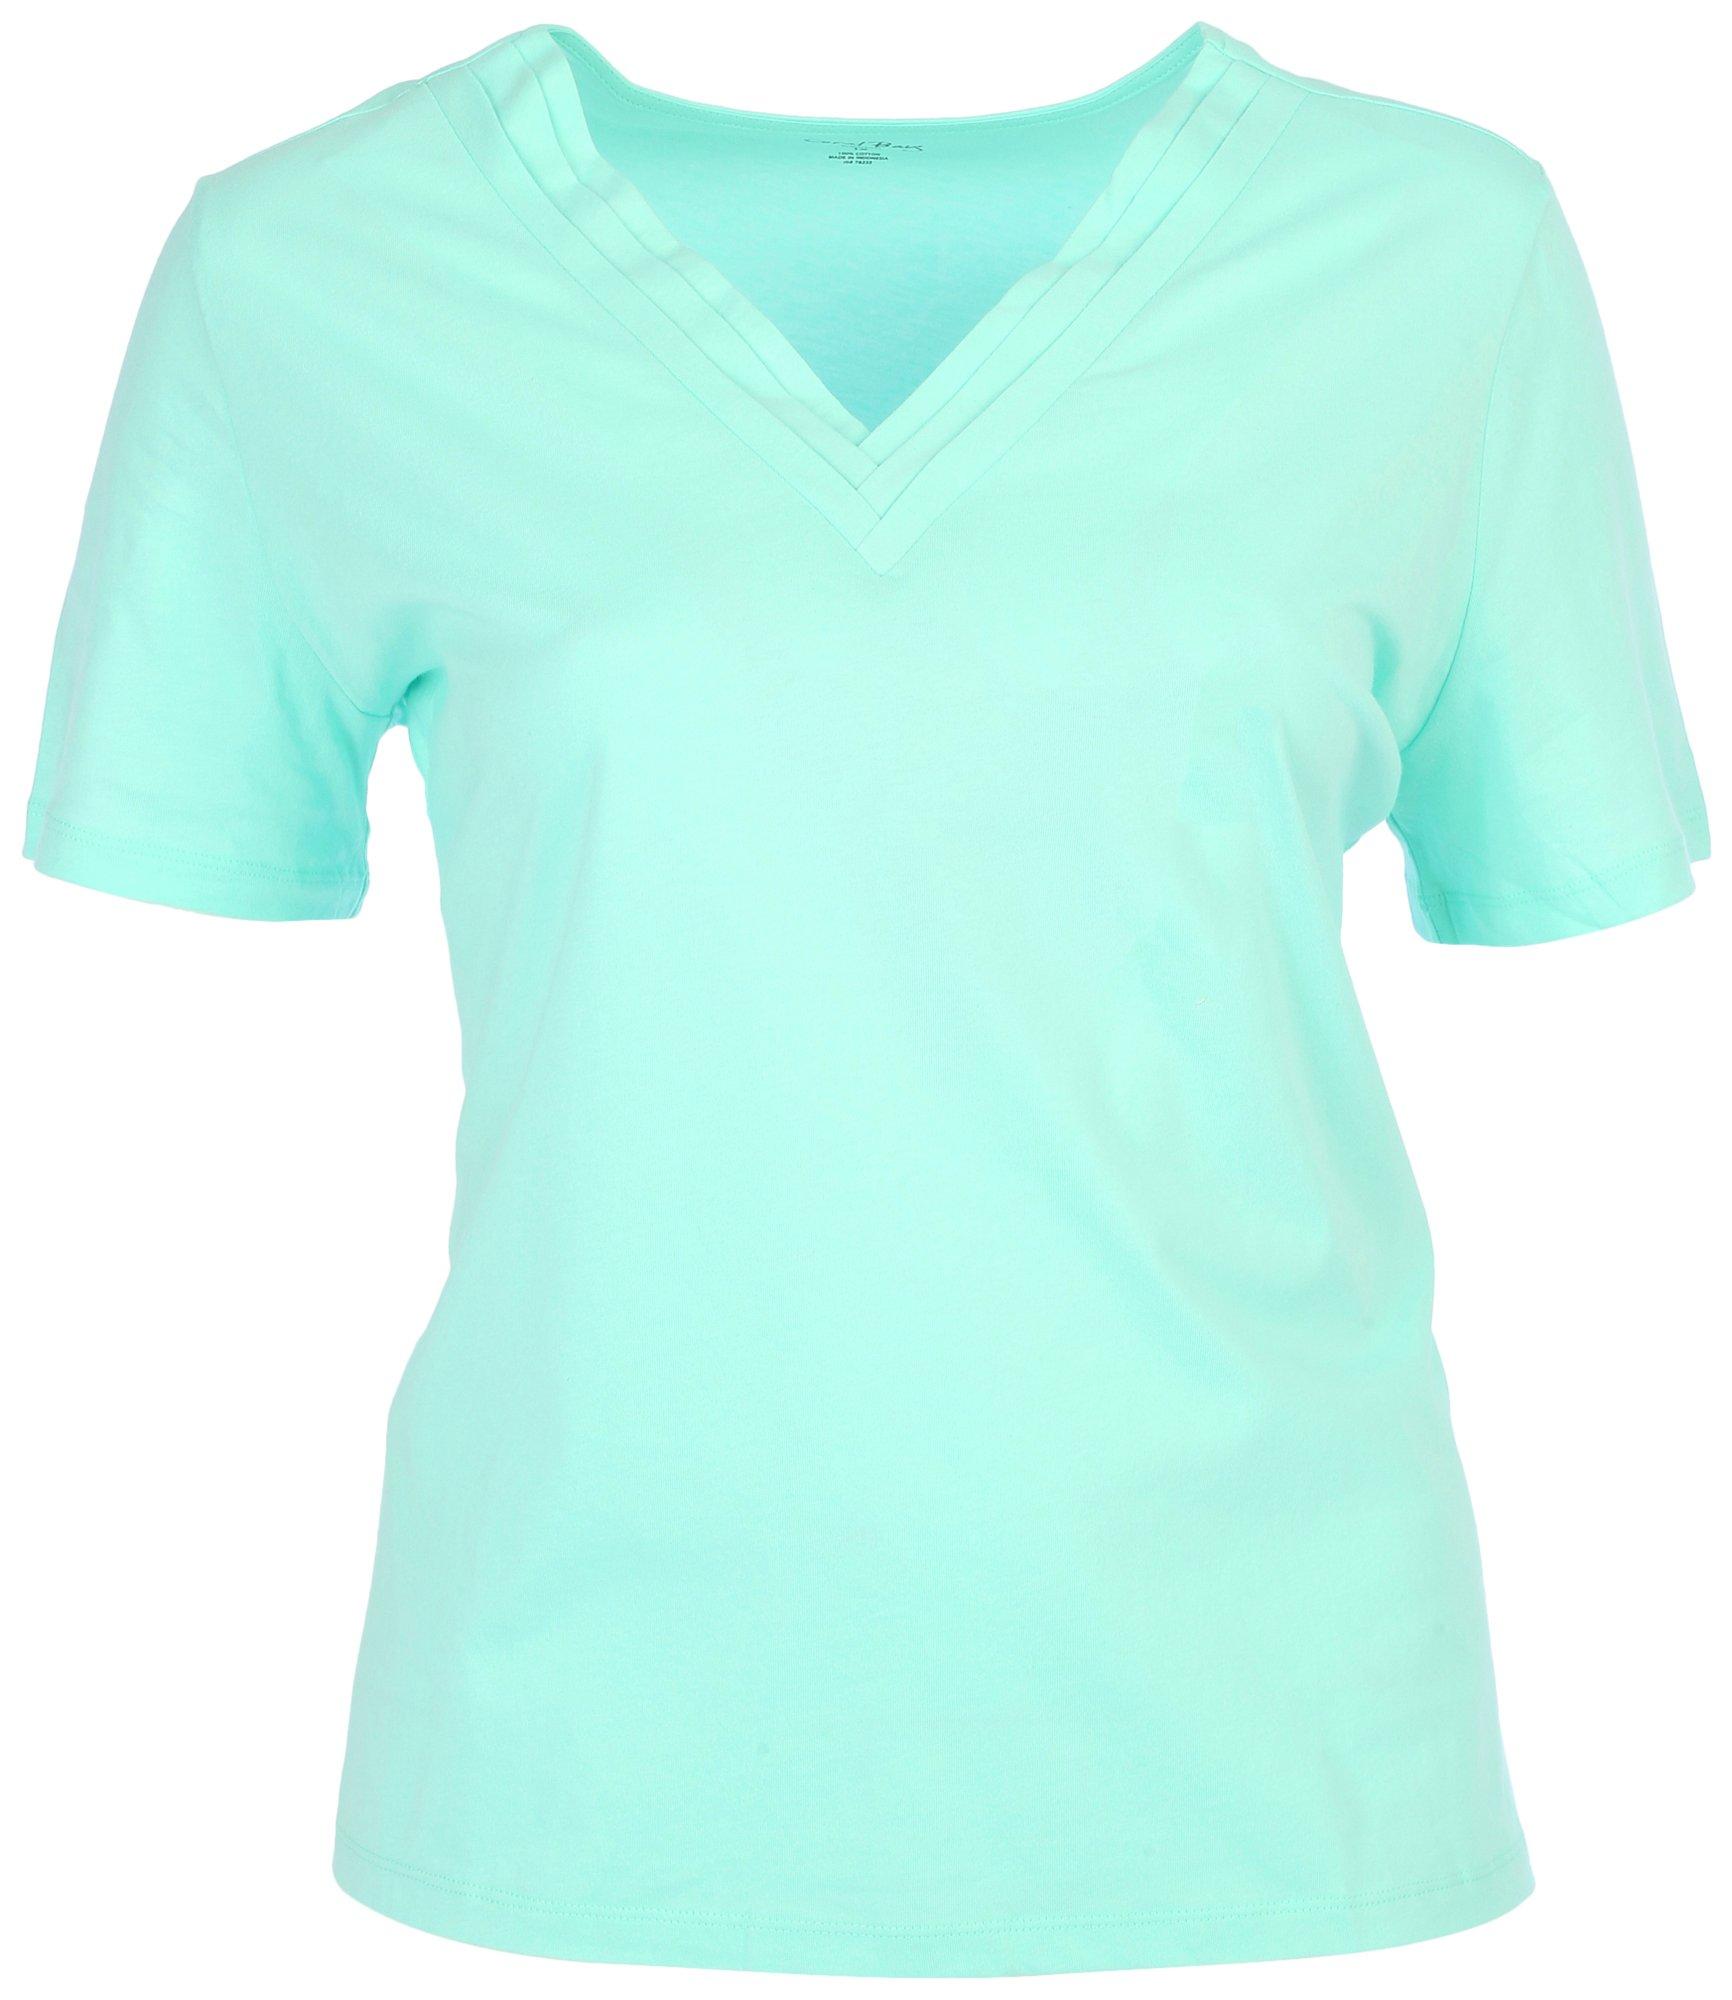 Coral Bay Plus Solid Layered V-Neckline Short Sleeve Top